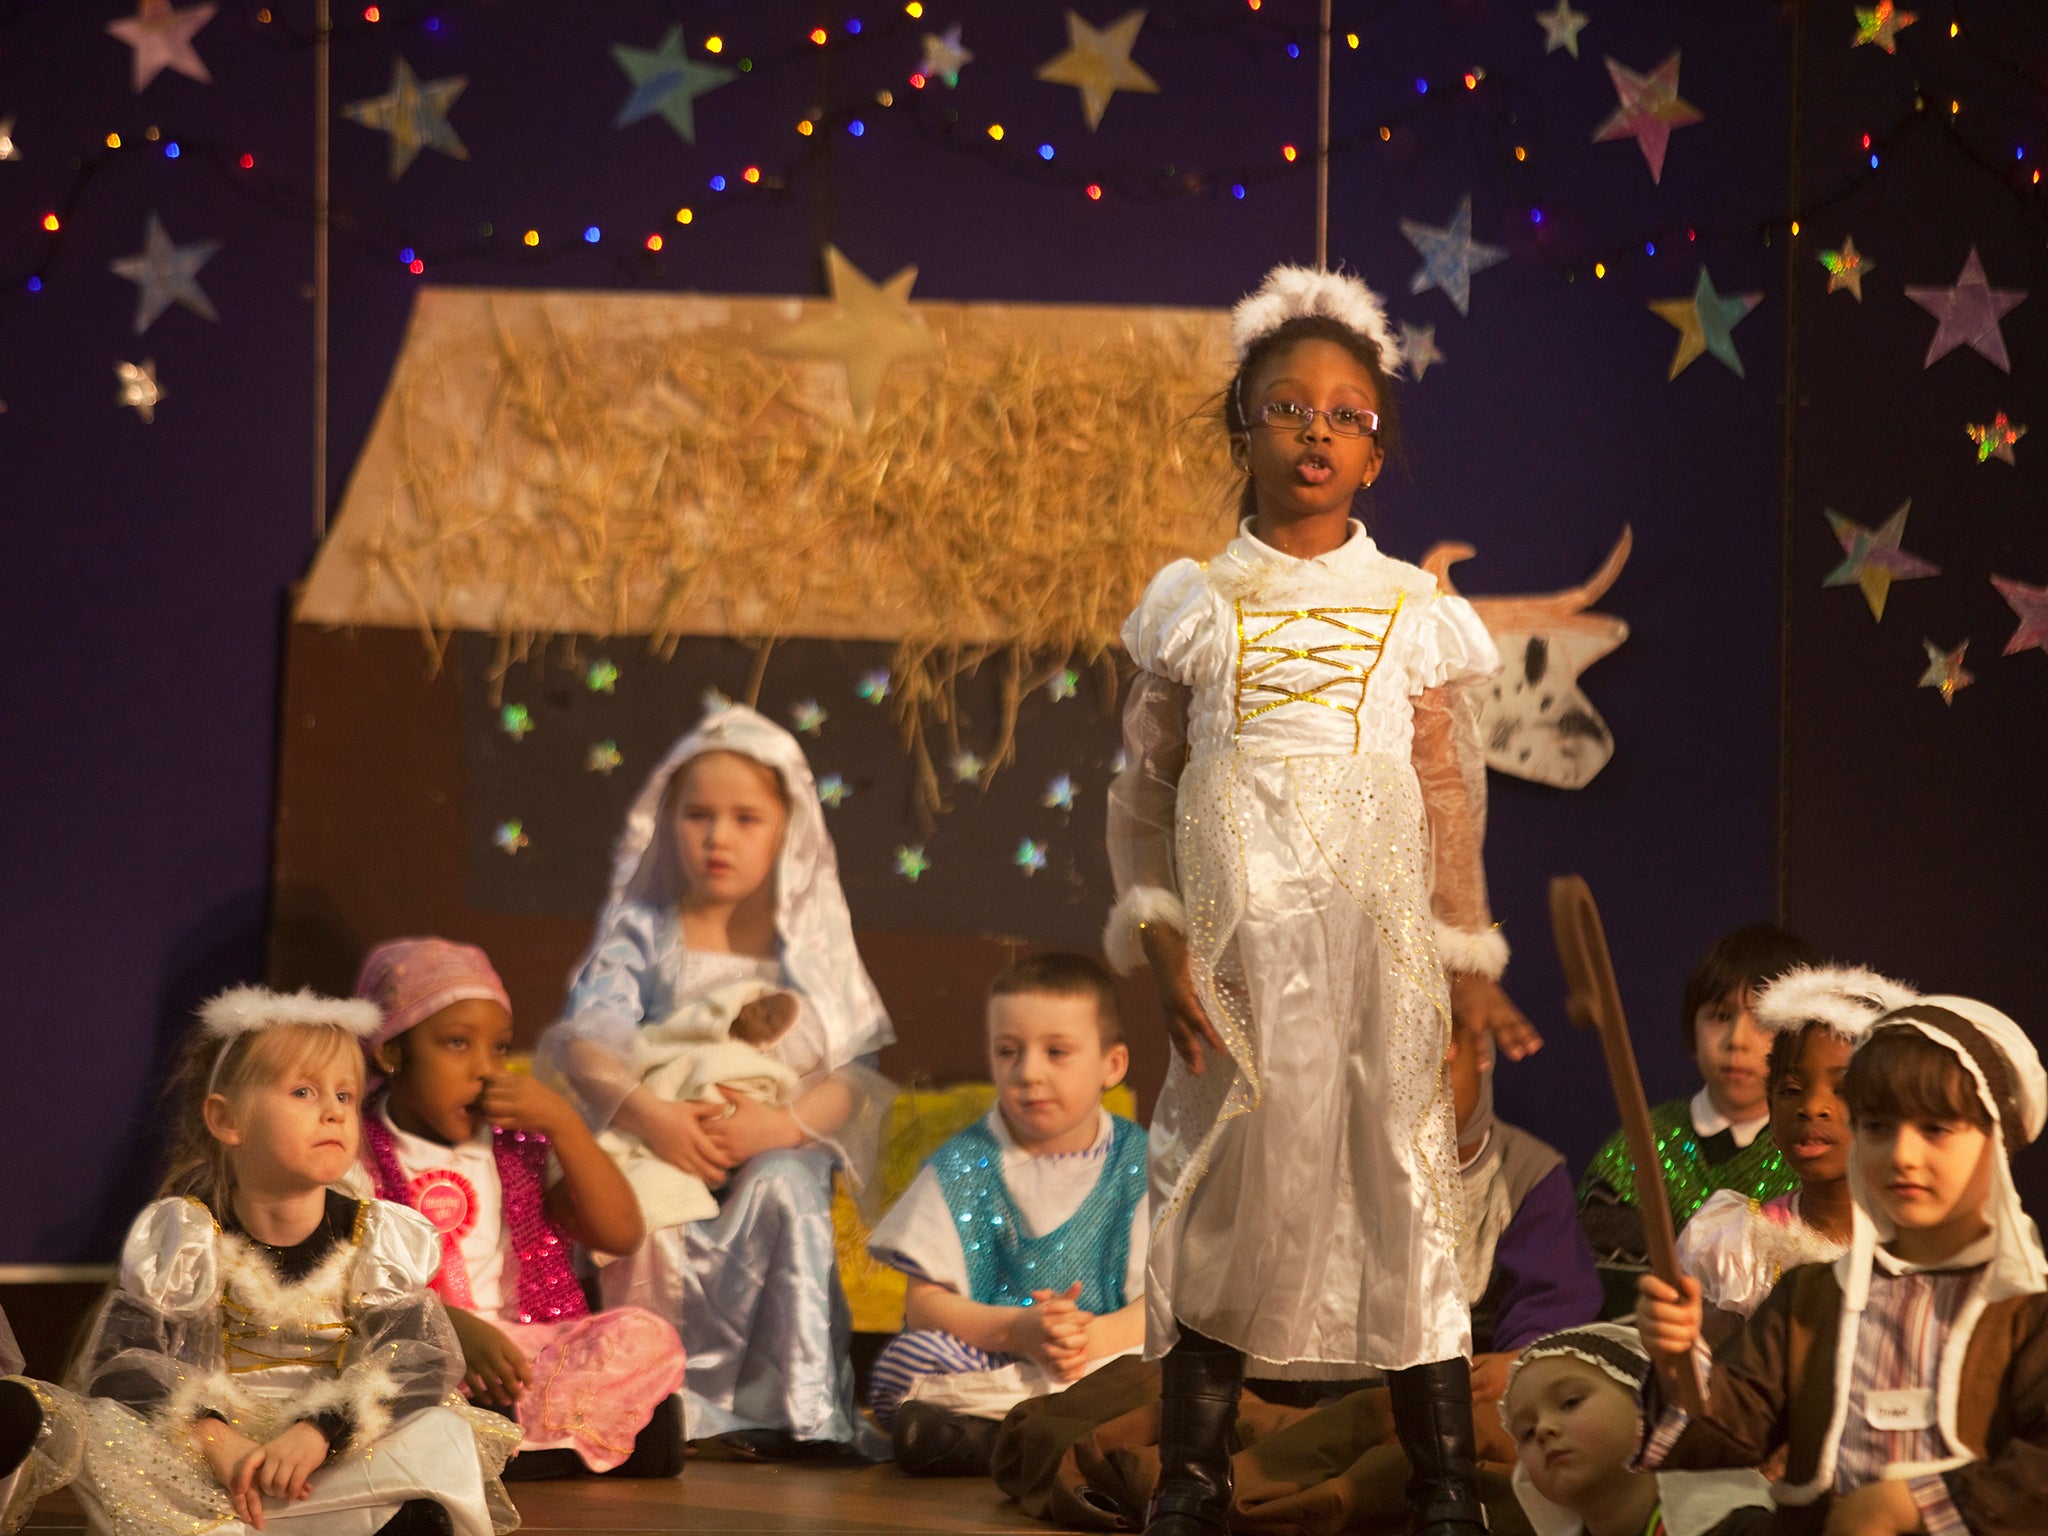 Should parents be allowed to take pictures at nativity plays?